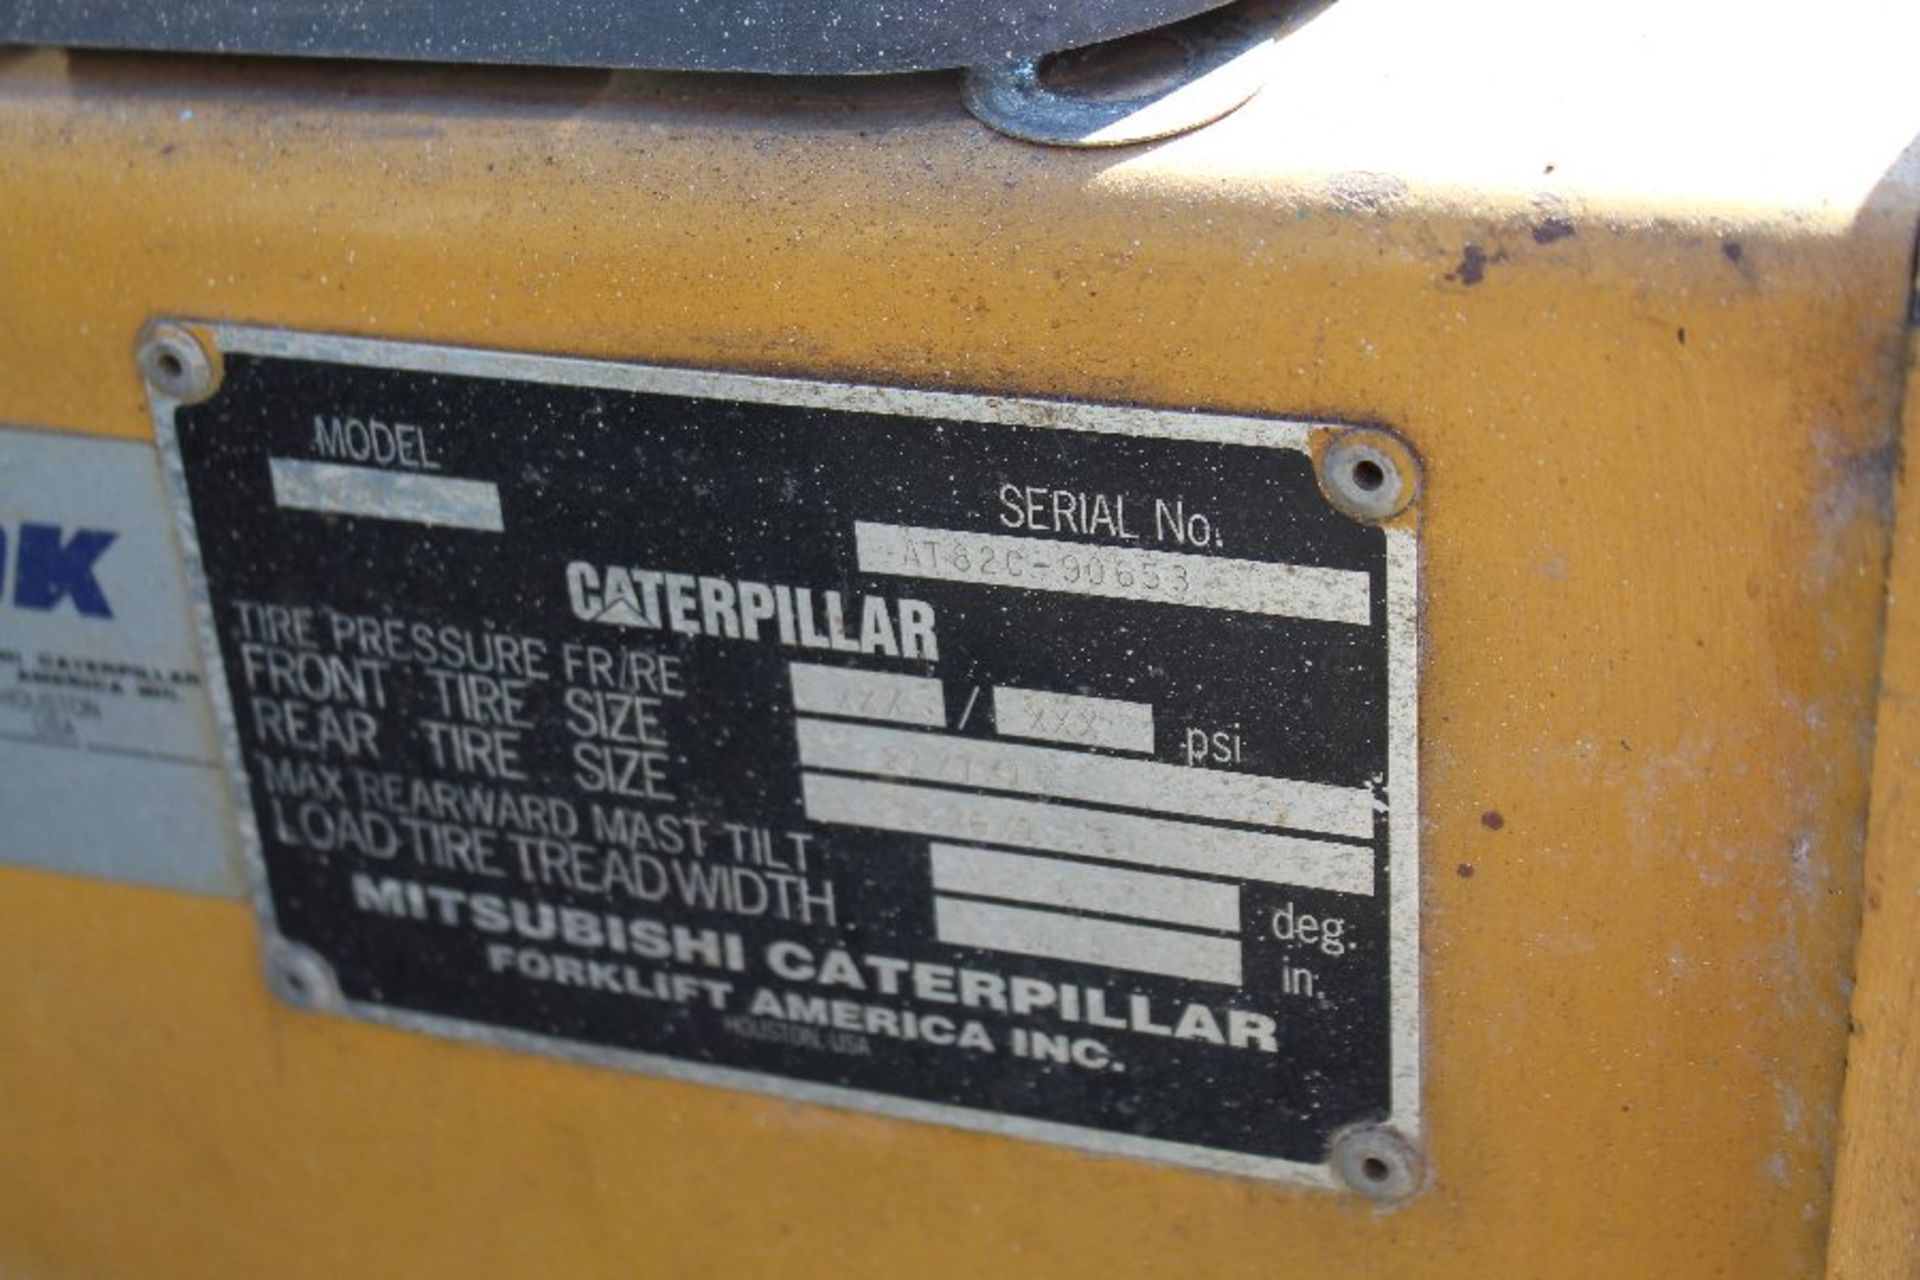 Caterpillar Model GC25K Forklift, 5000lb, 200" Lift, Solid Tired LP Gas, 10,950 Hours, s/n AT82C- - Image 3 of 3